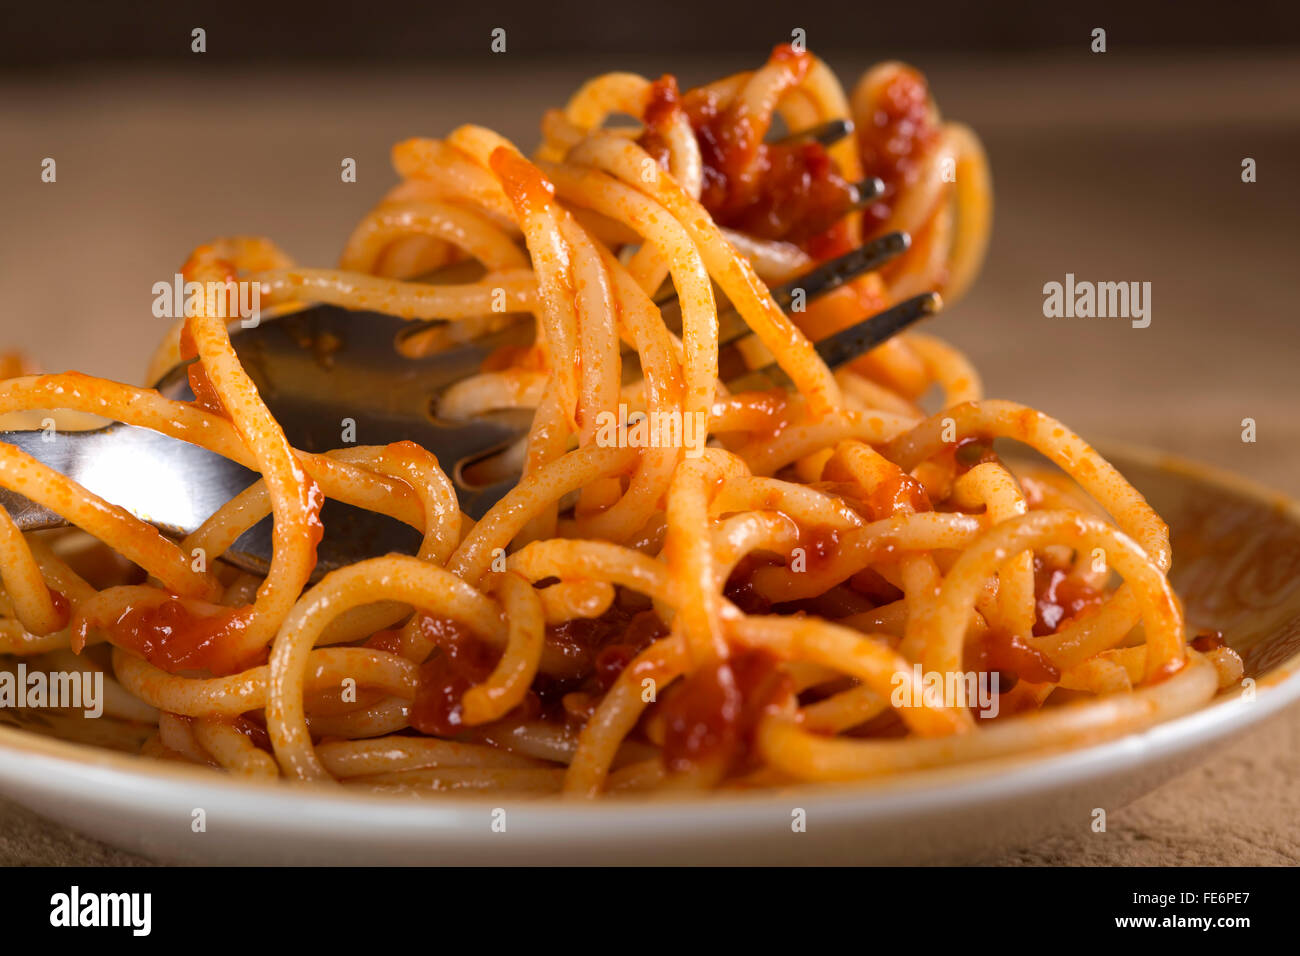 Spaghetti with tomato sauce and fork close up Stock Photo